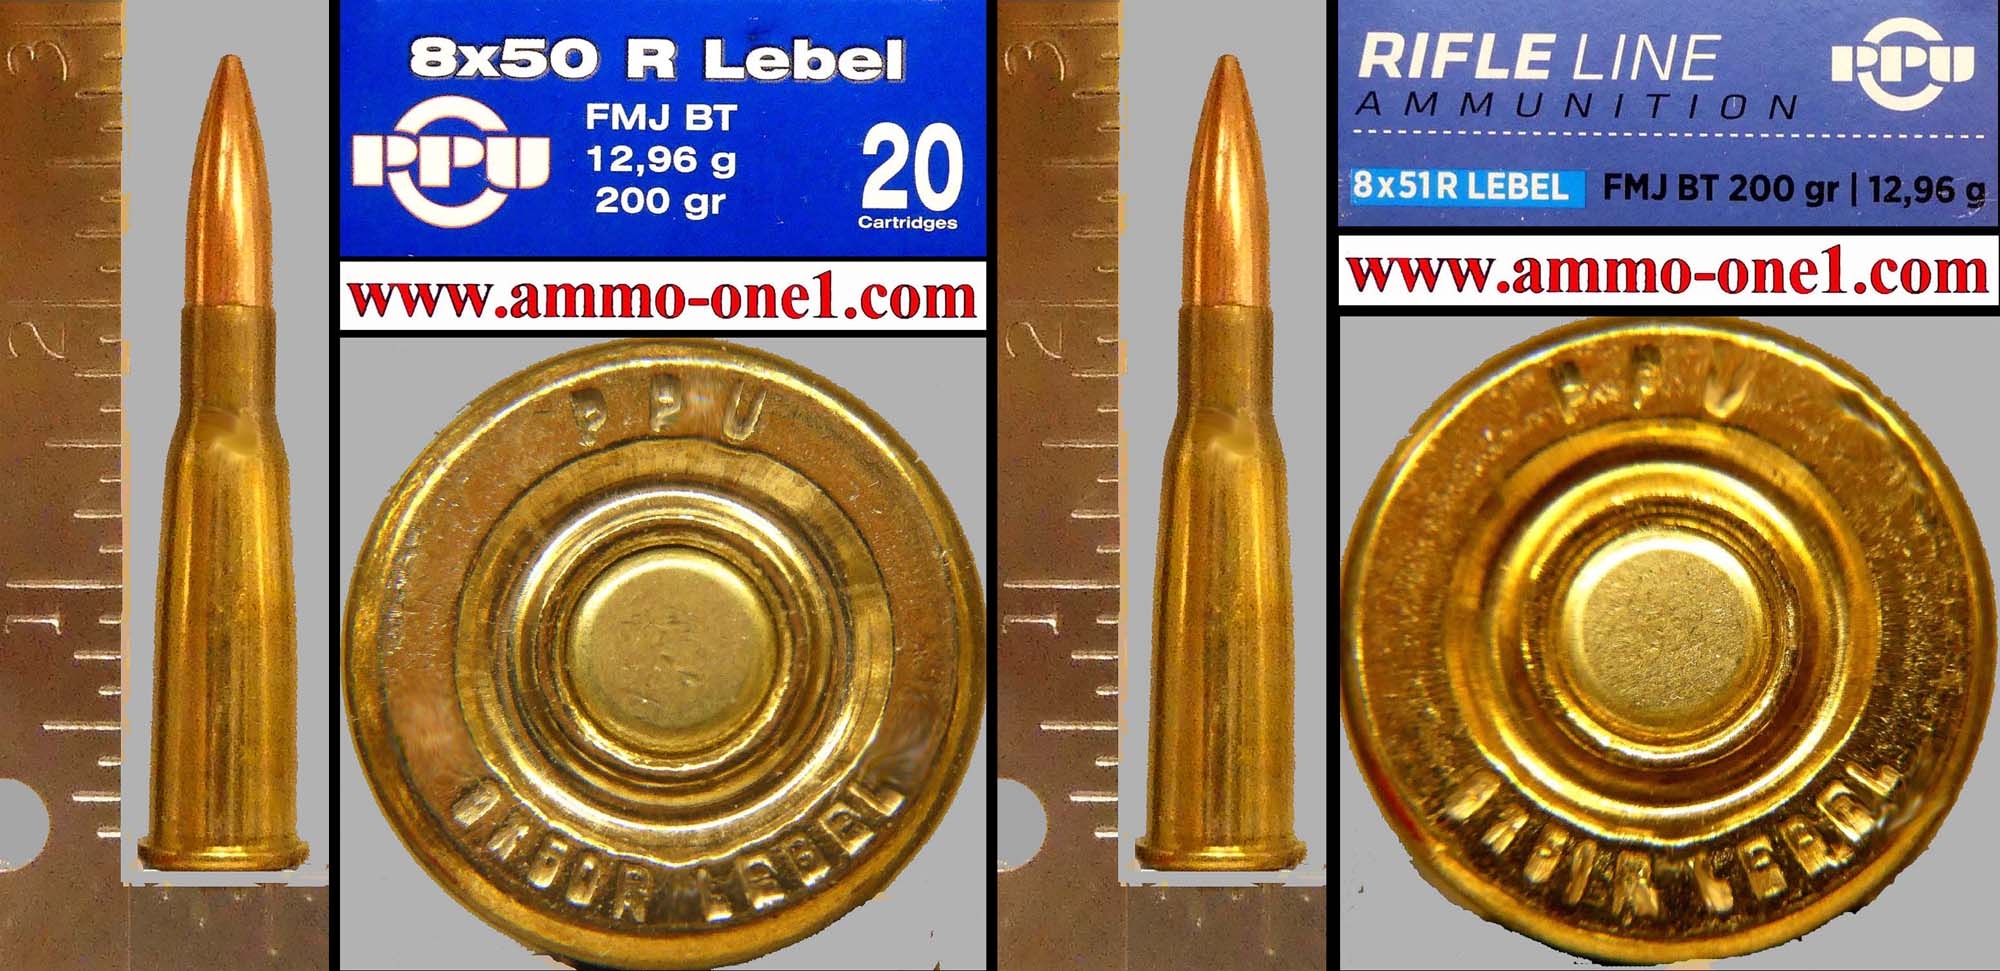 8x50R and 8x51R Lebel, 2 Different Cartridges not a Box. - Ammo